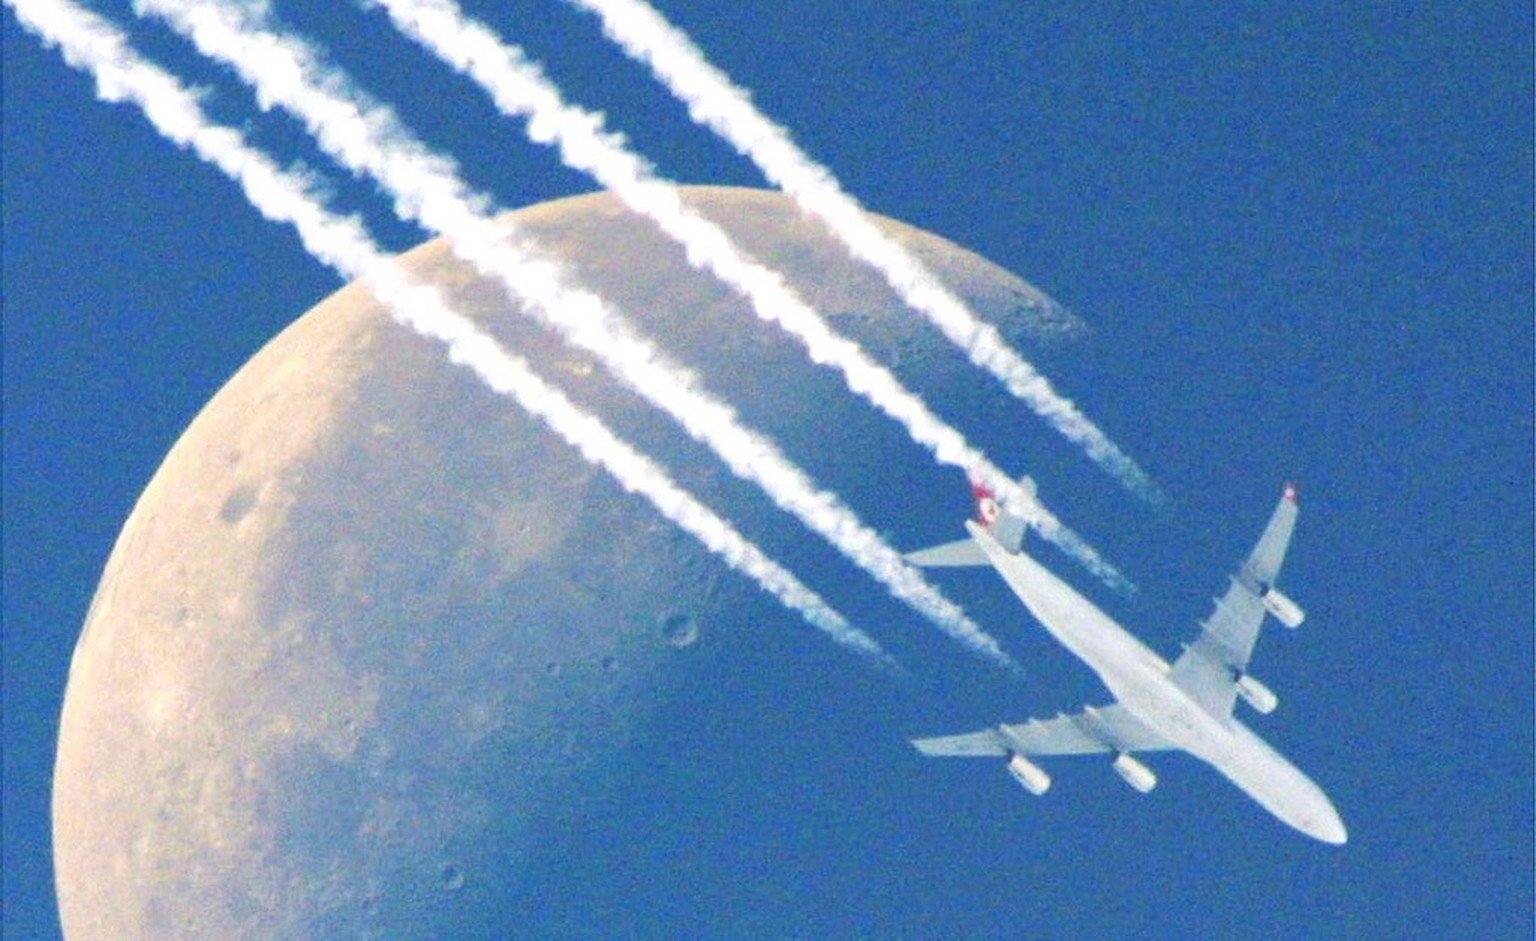 A north-west bound four-engine plane flies past the half moon, leaving its contrails in the clear skies over Frankfurt, Germany, Monday morning, Sept. 30, 2002, as clear early autumn weather prevails  ...